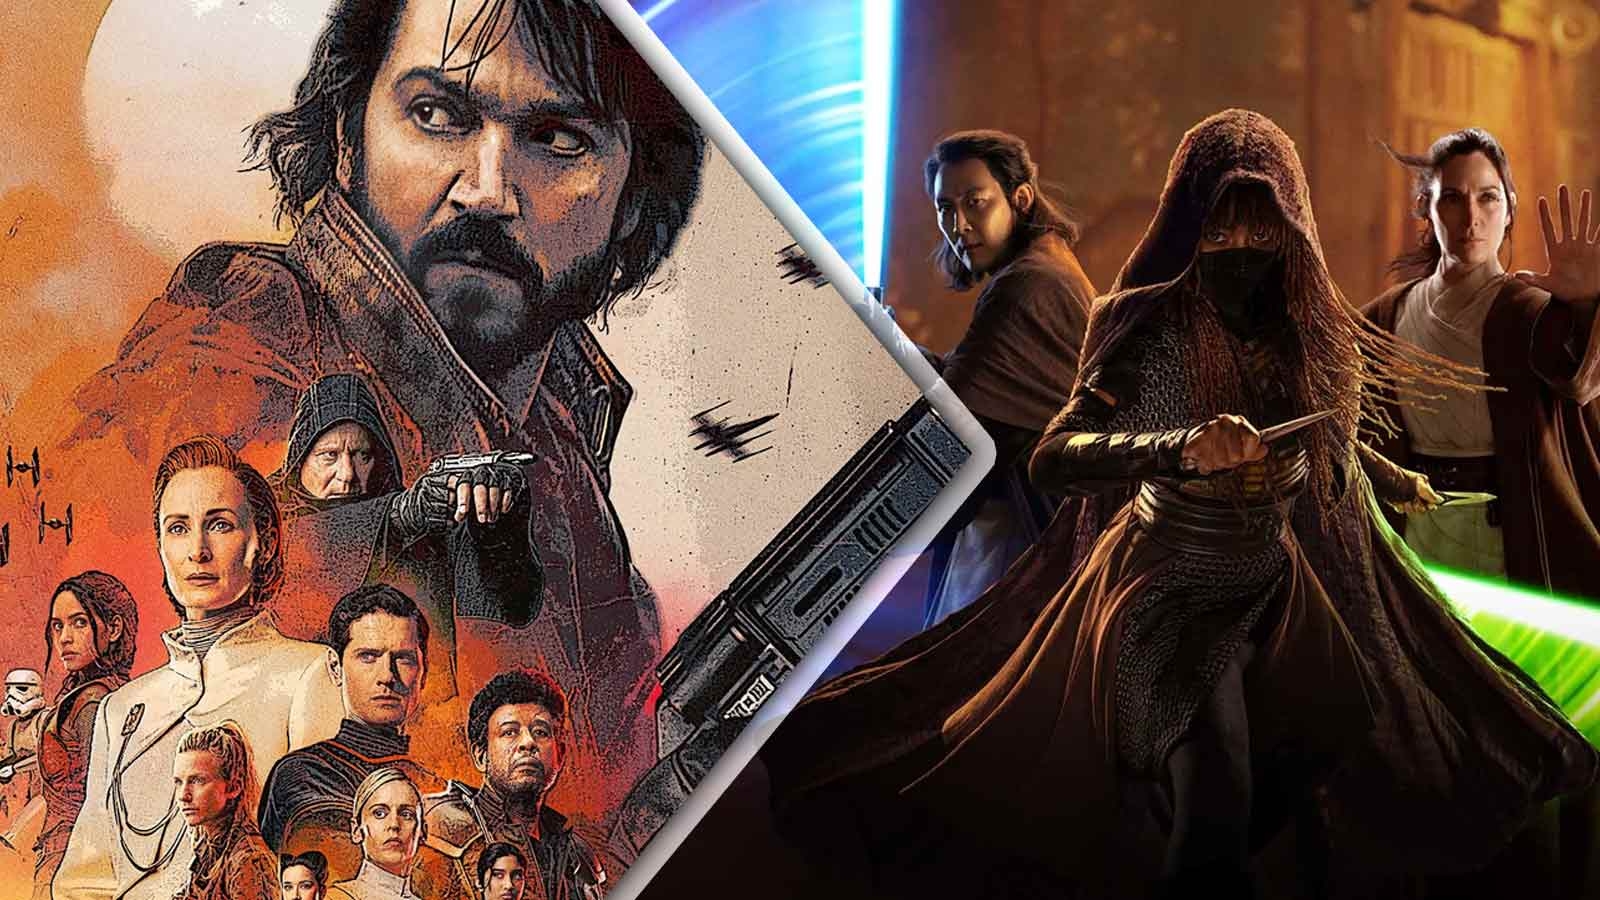 “I can’t believe he got away with it”: ‘Andor’ Sets an Impossible Bar for Star Wars’ Future, Shows Where ‘The Acolyte’ Went Wrong With Its Prequel Storyline